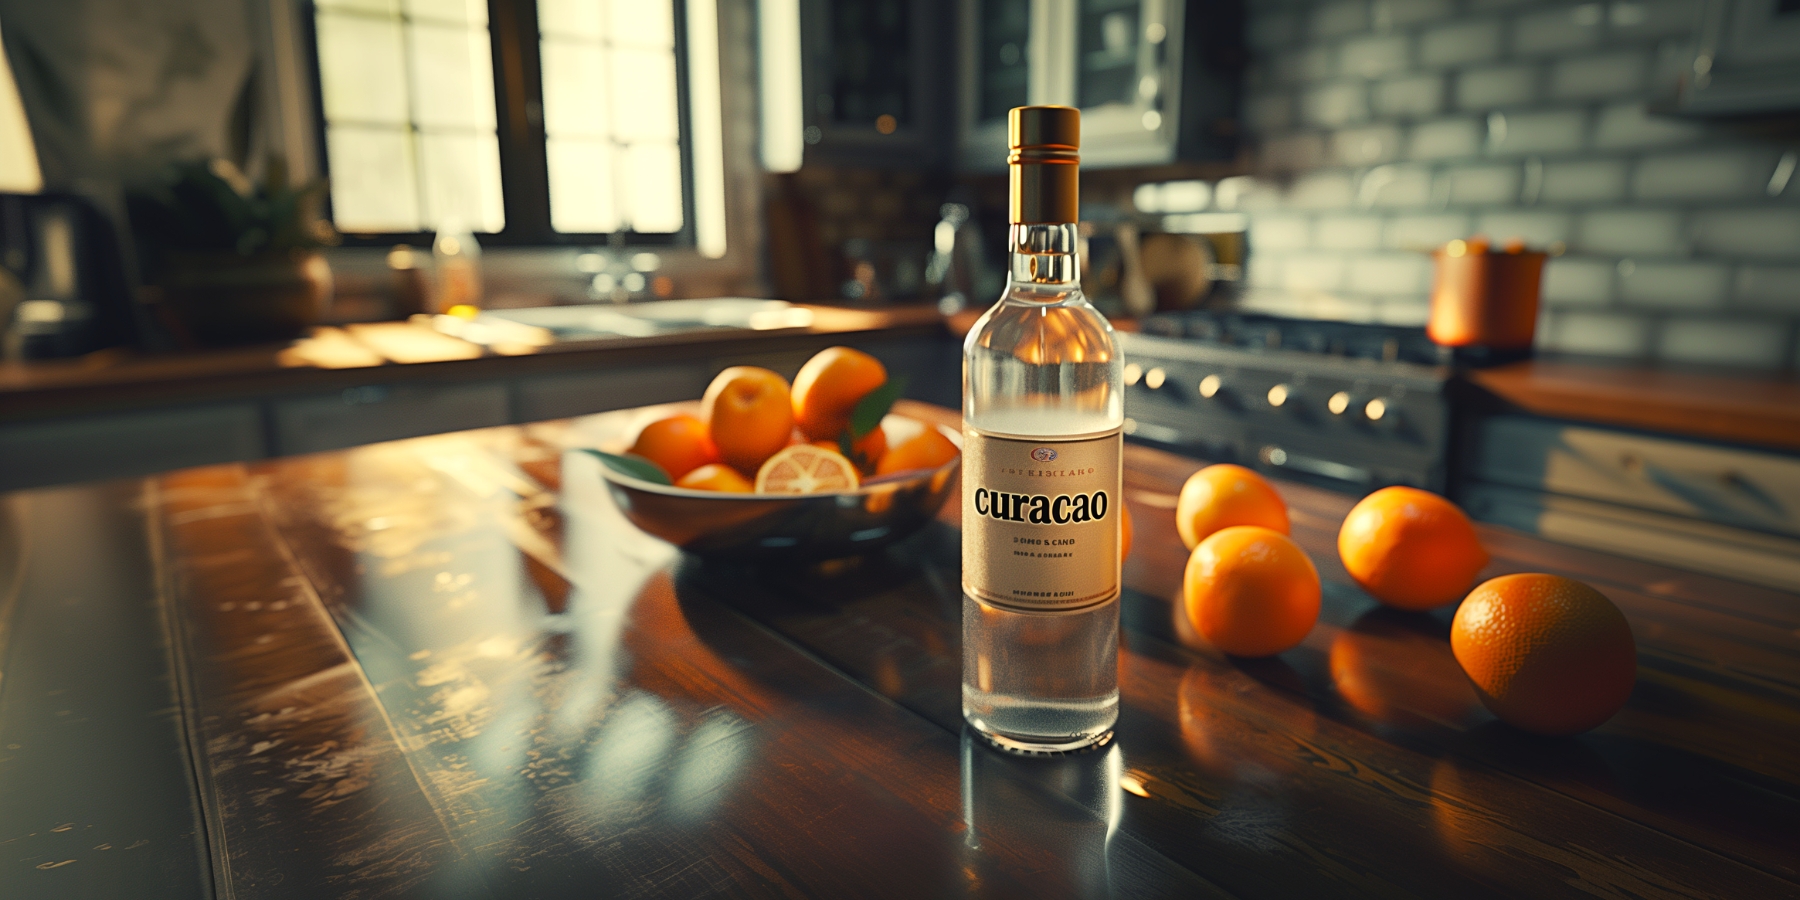 A bottle of clear curaçao on a kitchen counter with oranges